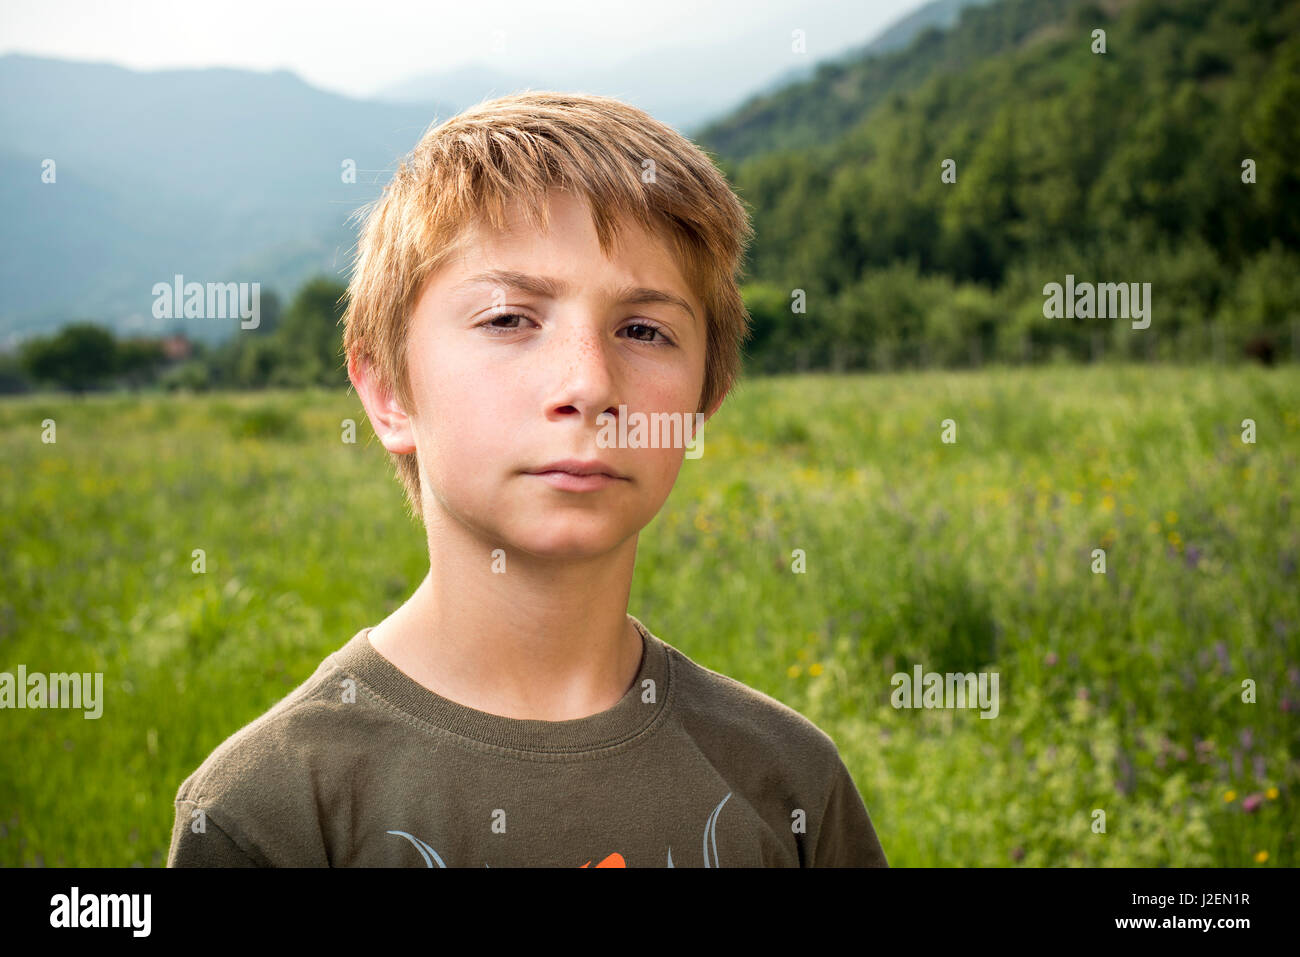 Head and Shoulders Portrait of Serious Young Boy Standing in Field with Mountains in Background Stock Photo